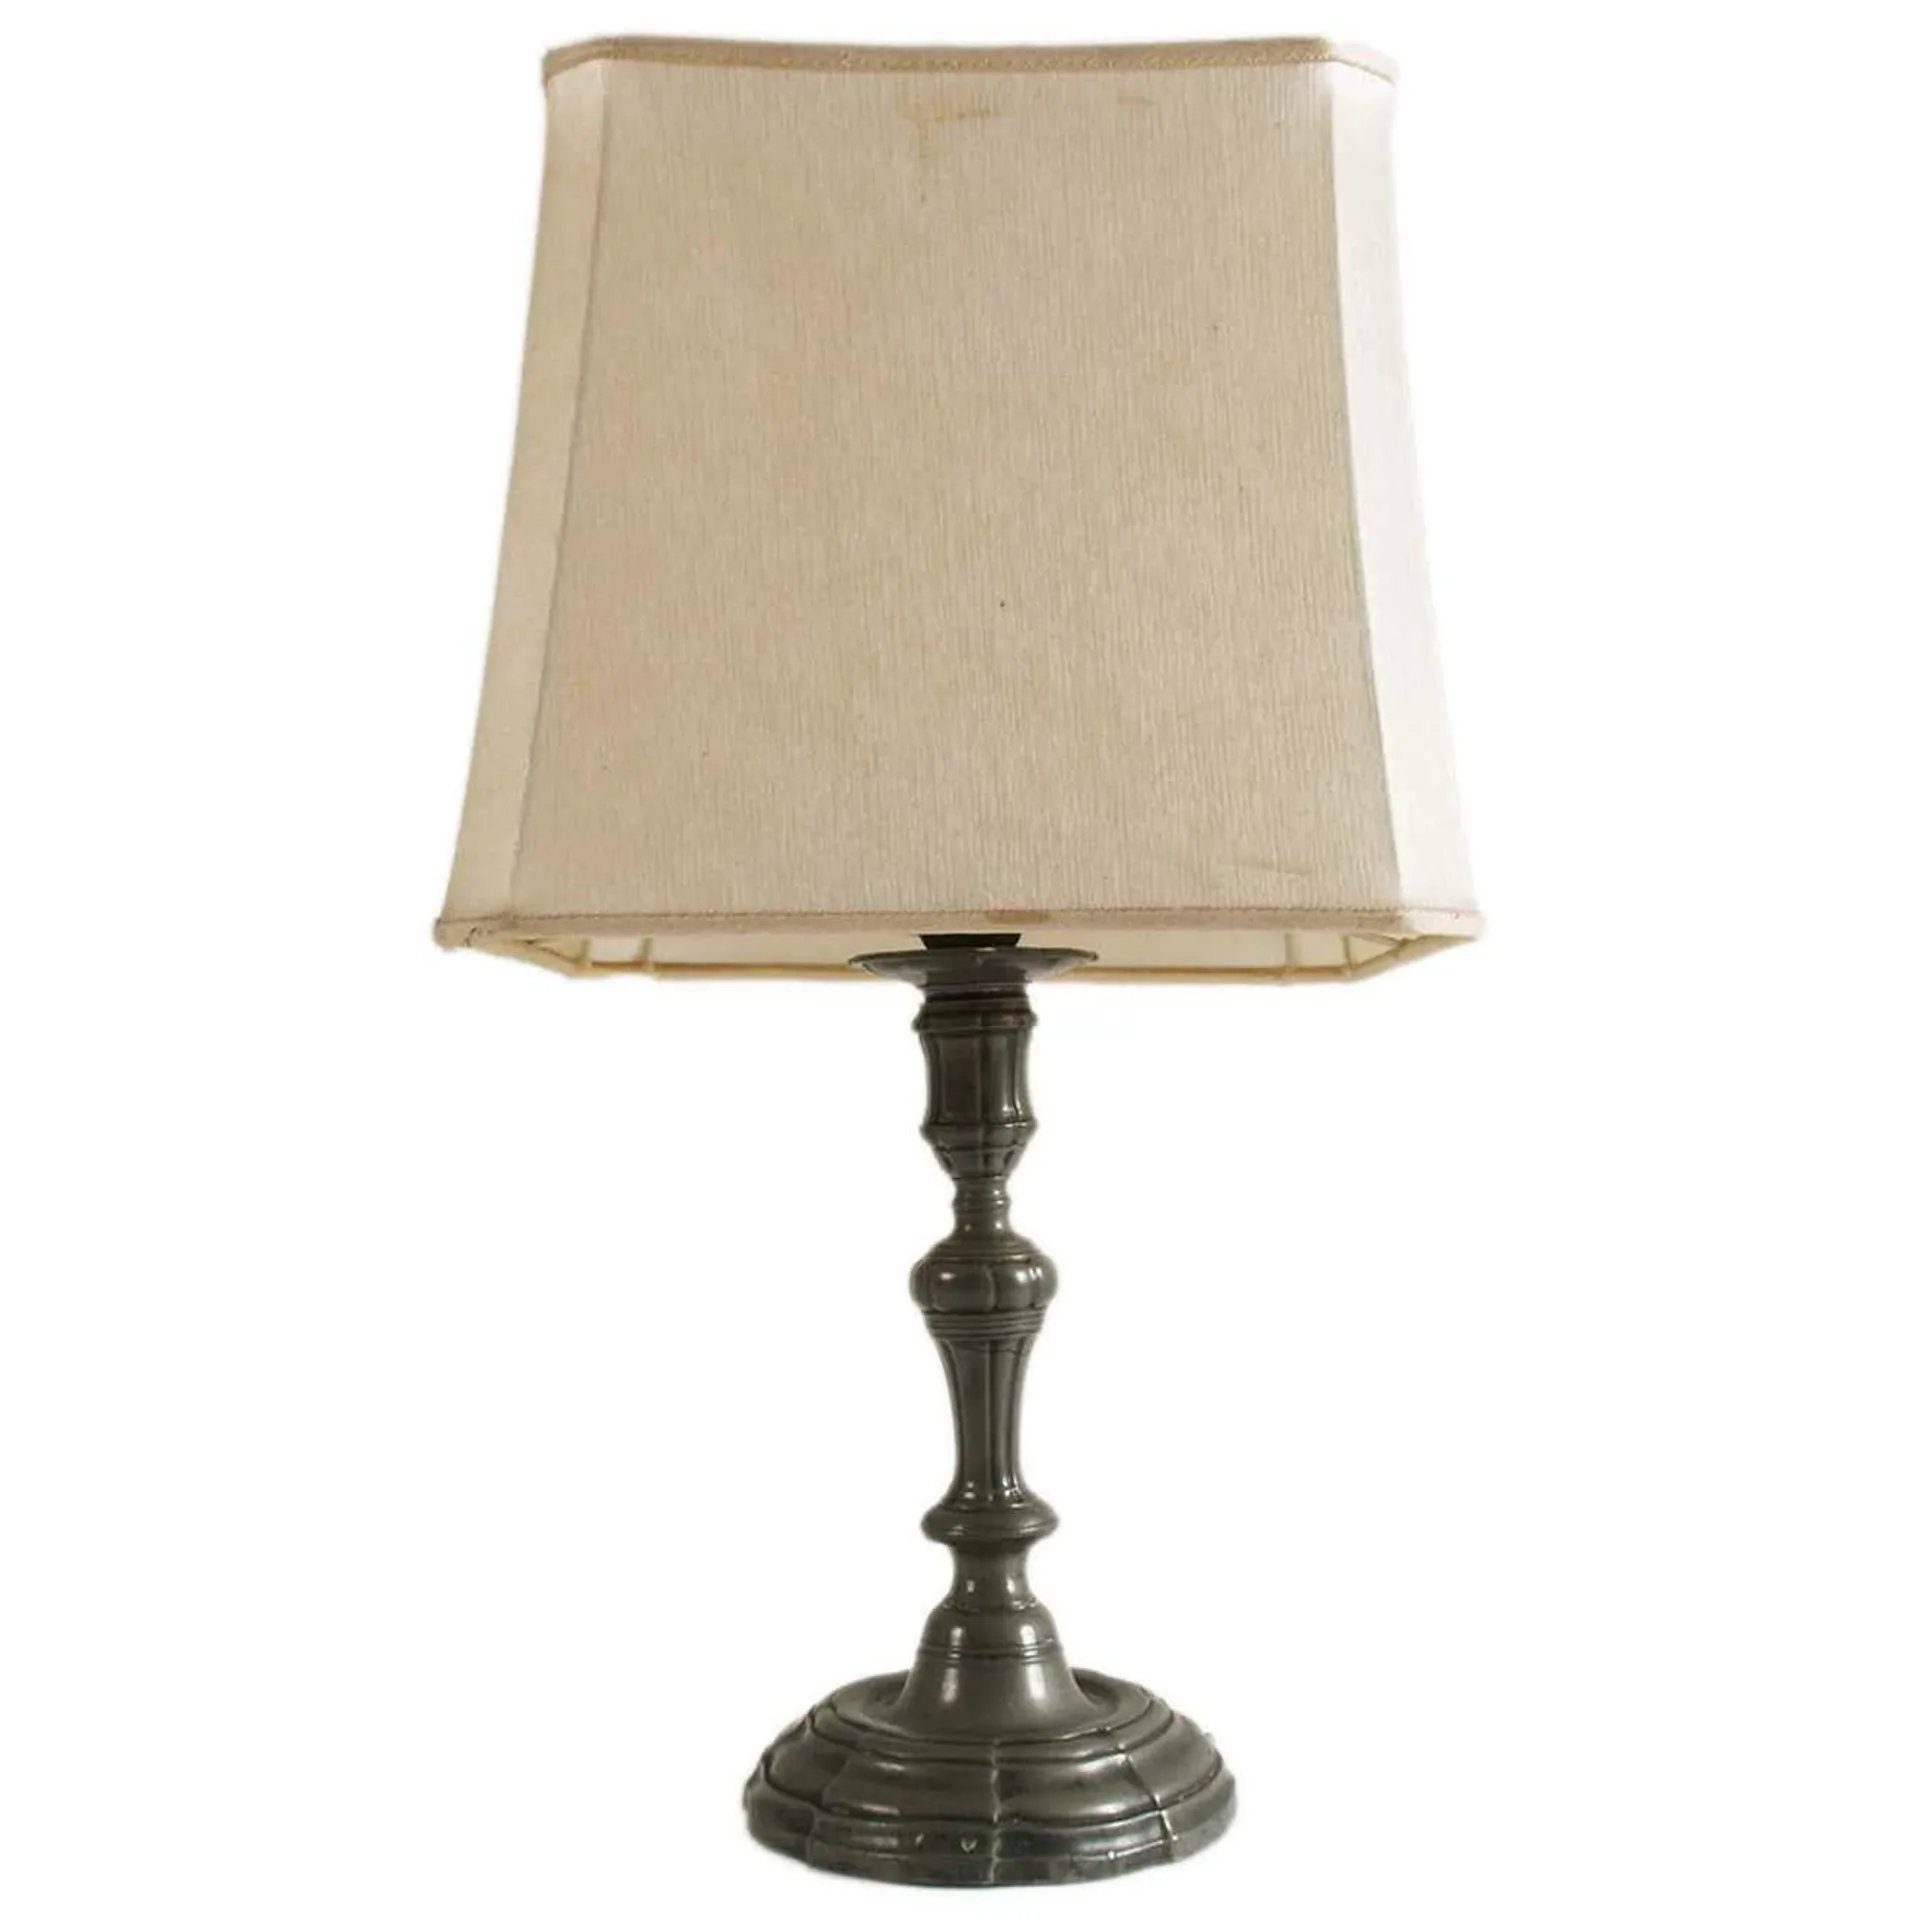 Antique 1930s Table Lamp in Patinated Pewter, Baroque style